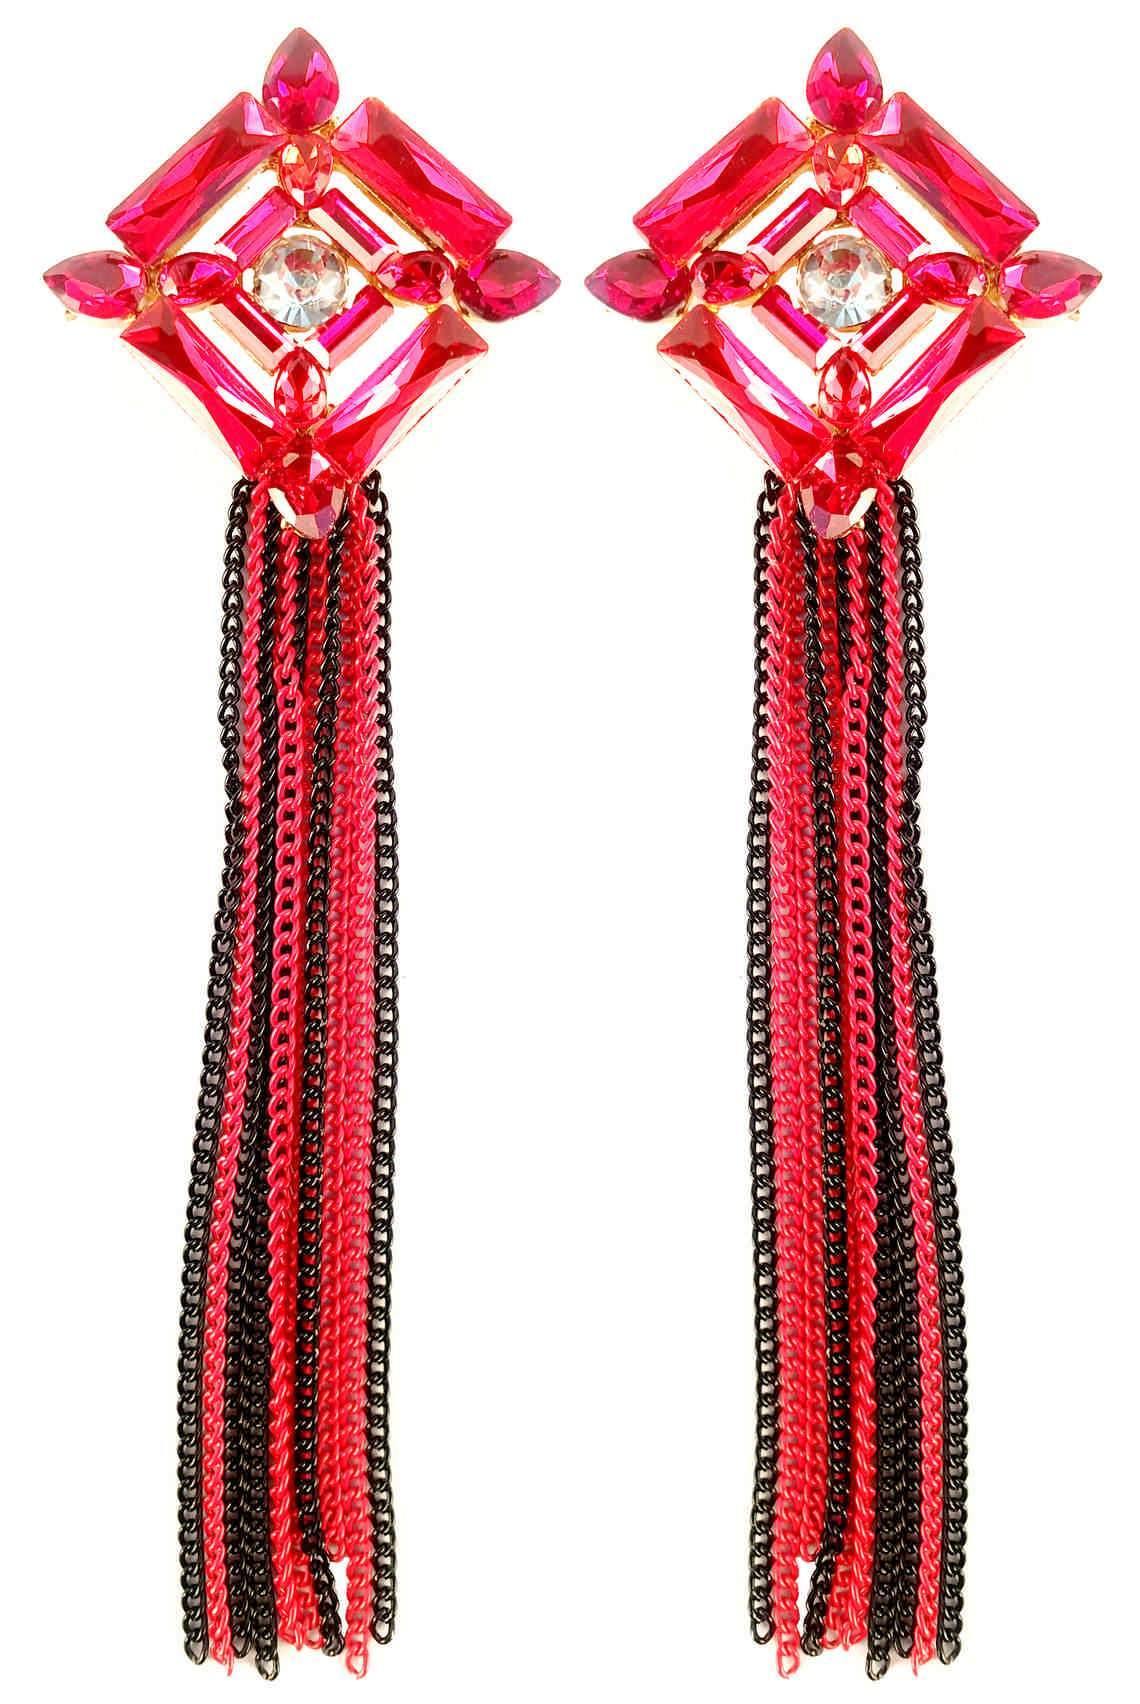 Indian Petals Crystal Chandelier Design Artificial Fashion Dangler Earrings Jhumka with Tassales for Girls Women, Red